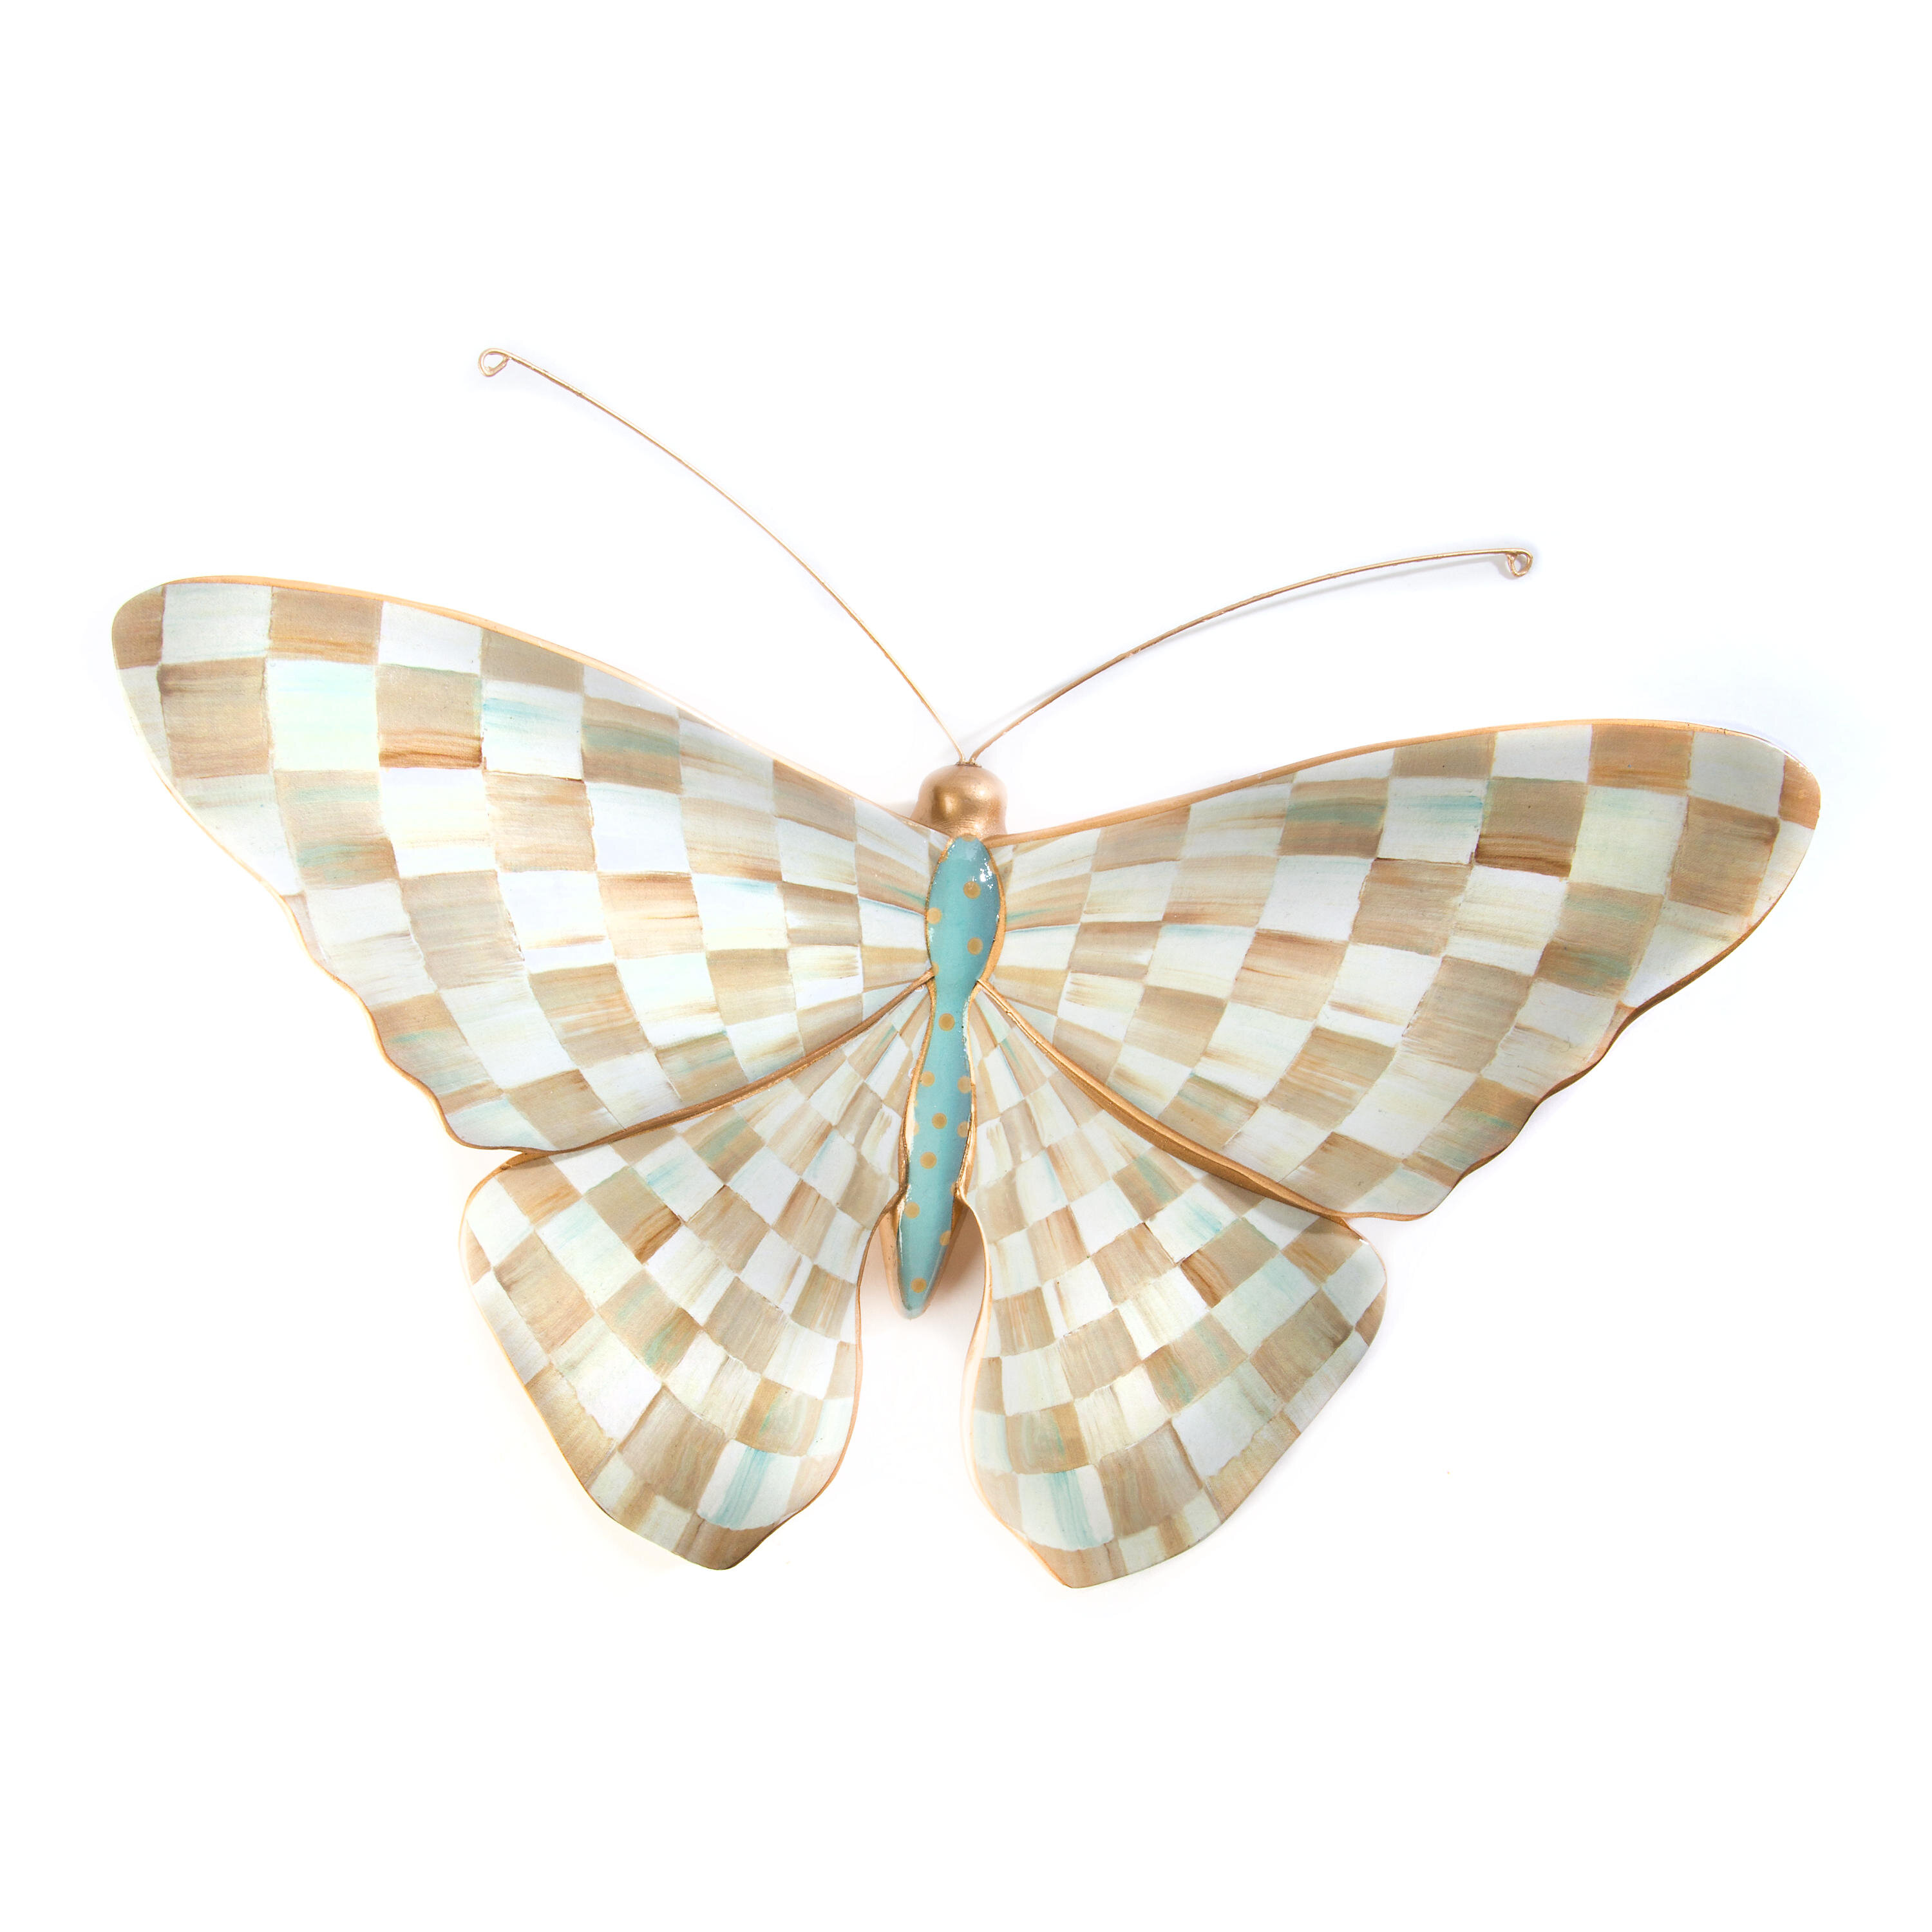 MacKenzie-Childs Parchment Check Butterfly Wall Decoration Hanging Butterfly Decorations 